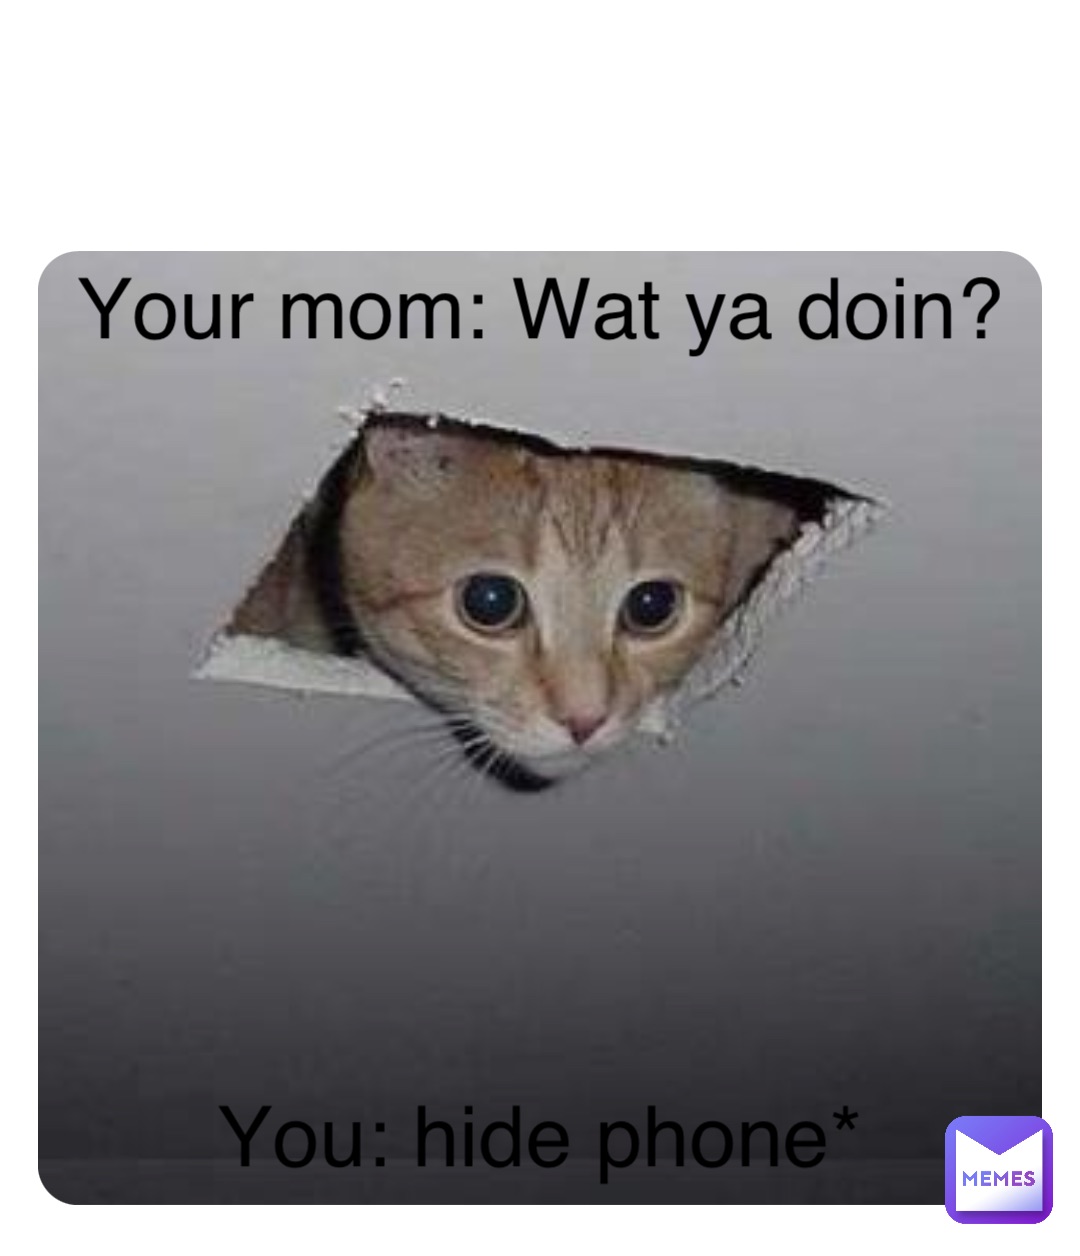 Double tap to edit Your mom: Wat ya doin? You: hide phone*